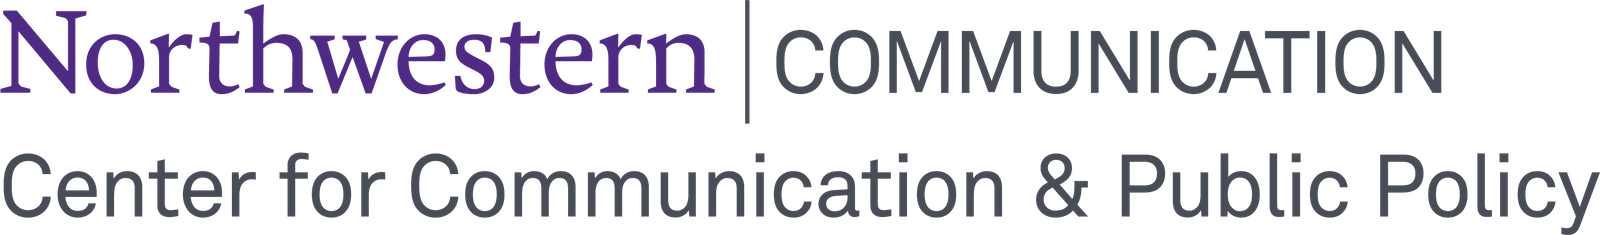 Center for Communication & Public Policy logo